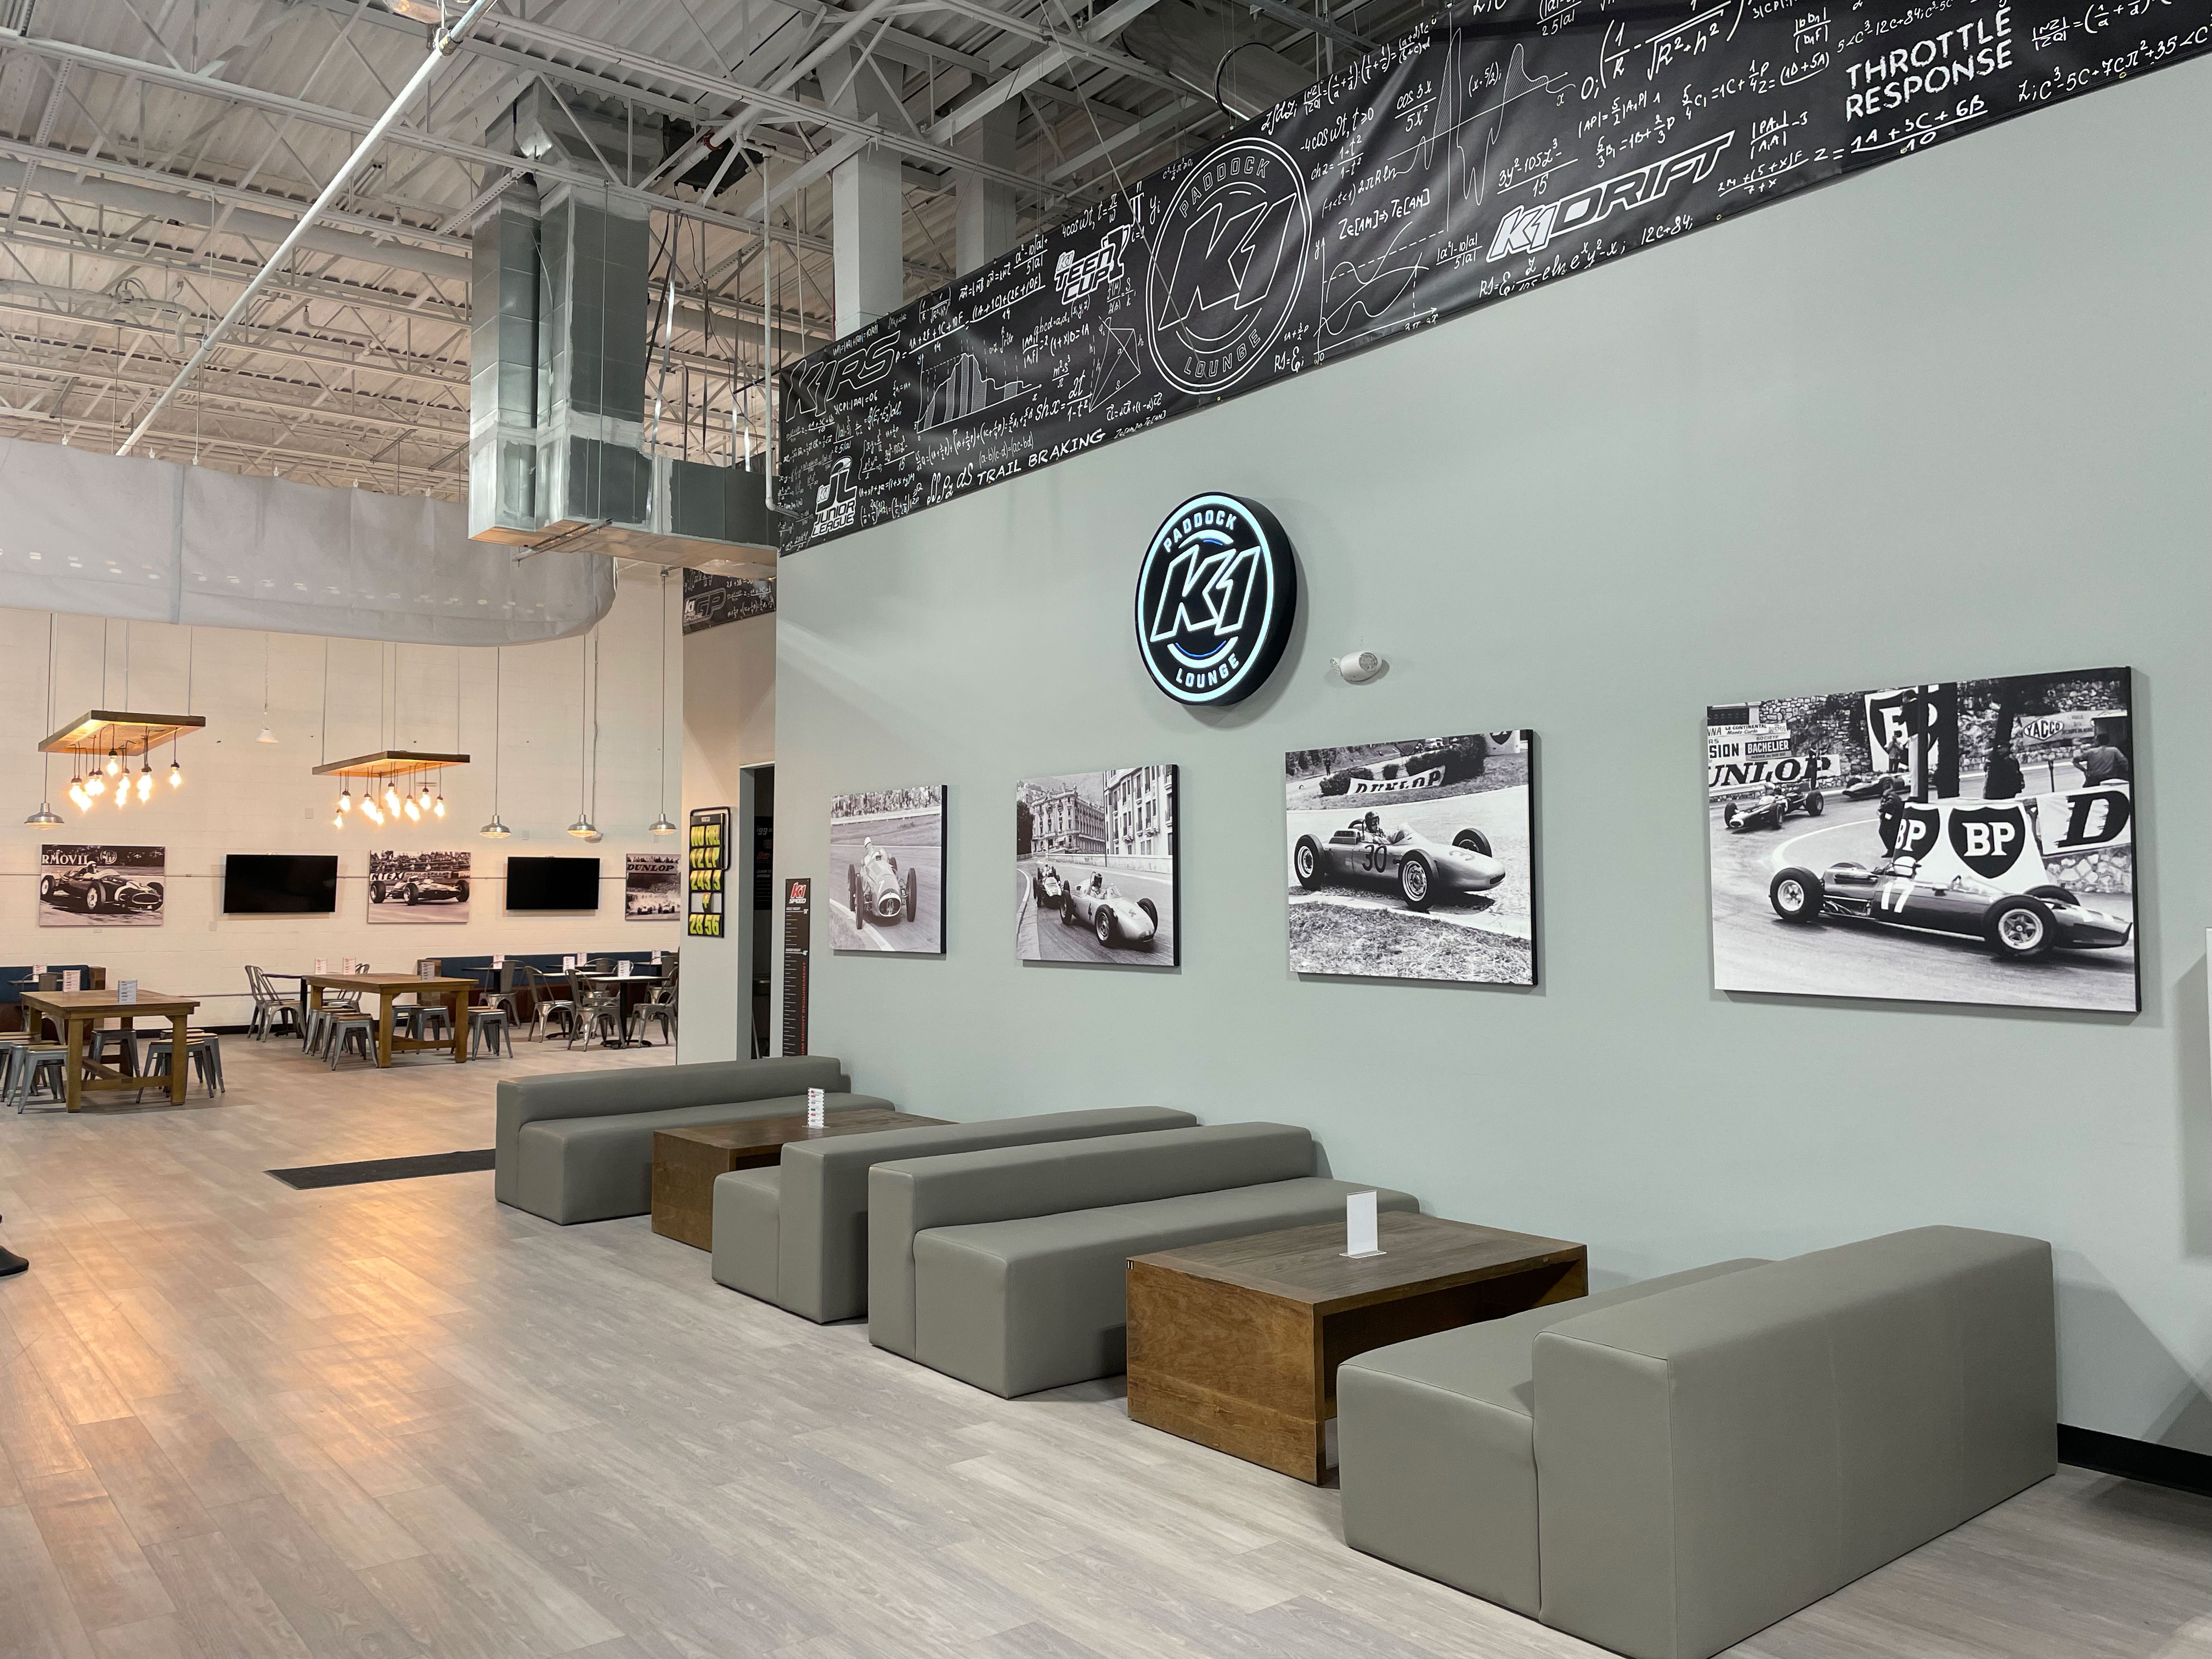 Leather couches and black and white images from racing's past decorate the center.